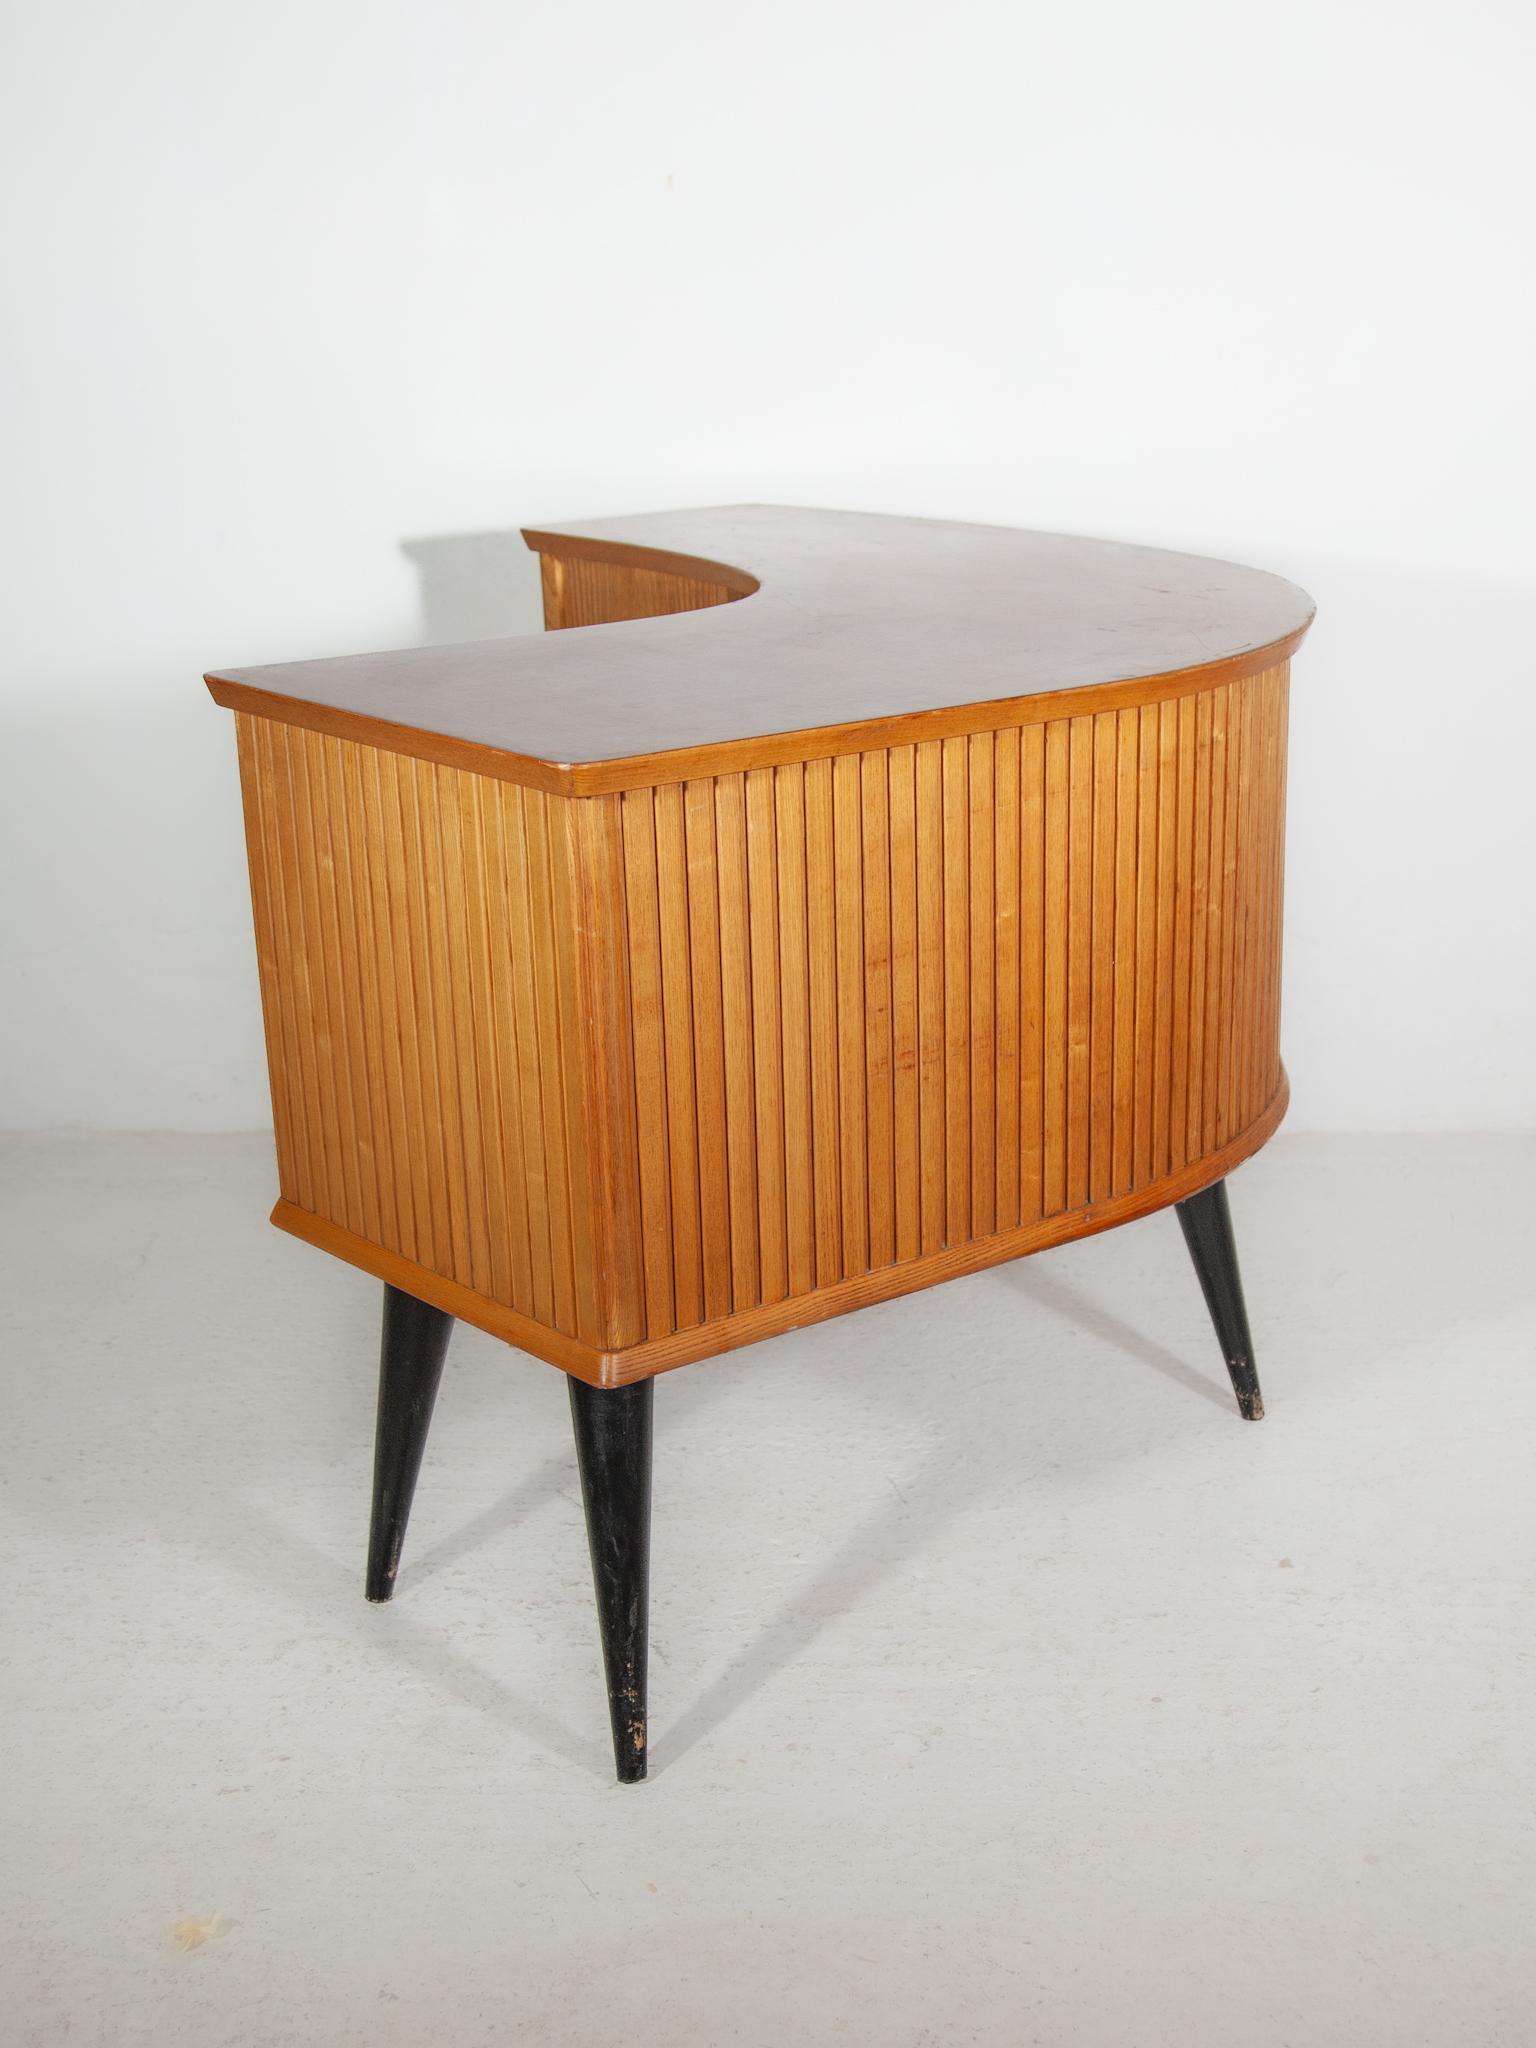 Boomerang Shaped Desk, Shop Counter, 1950s by Alfred Hendrickx For Sale 1